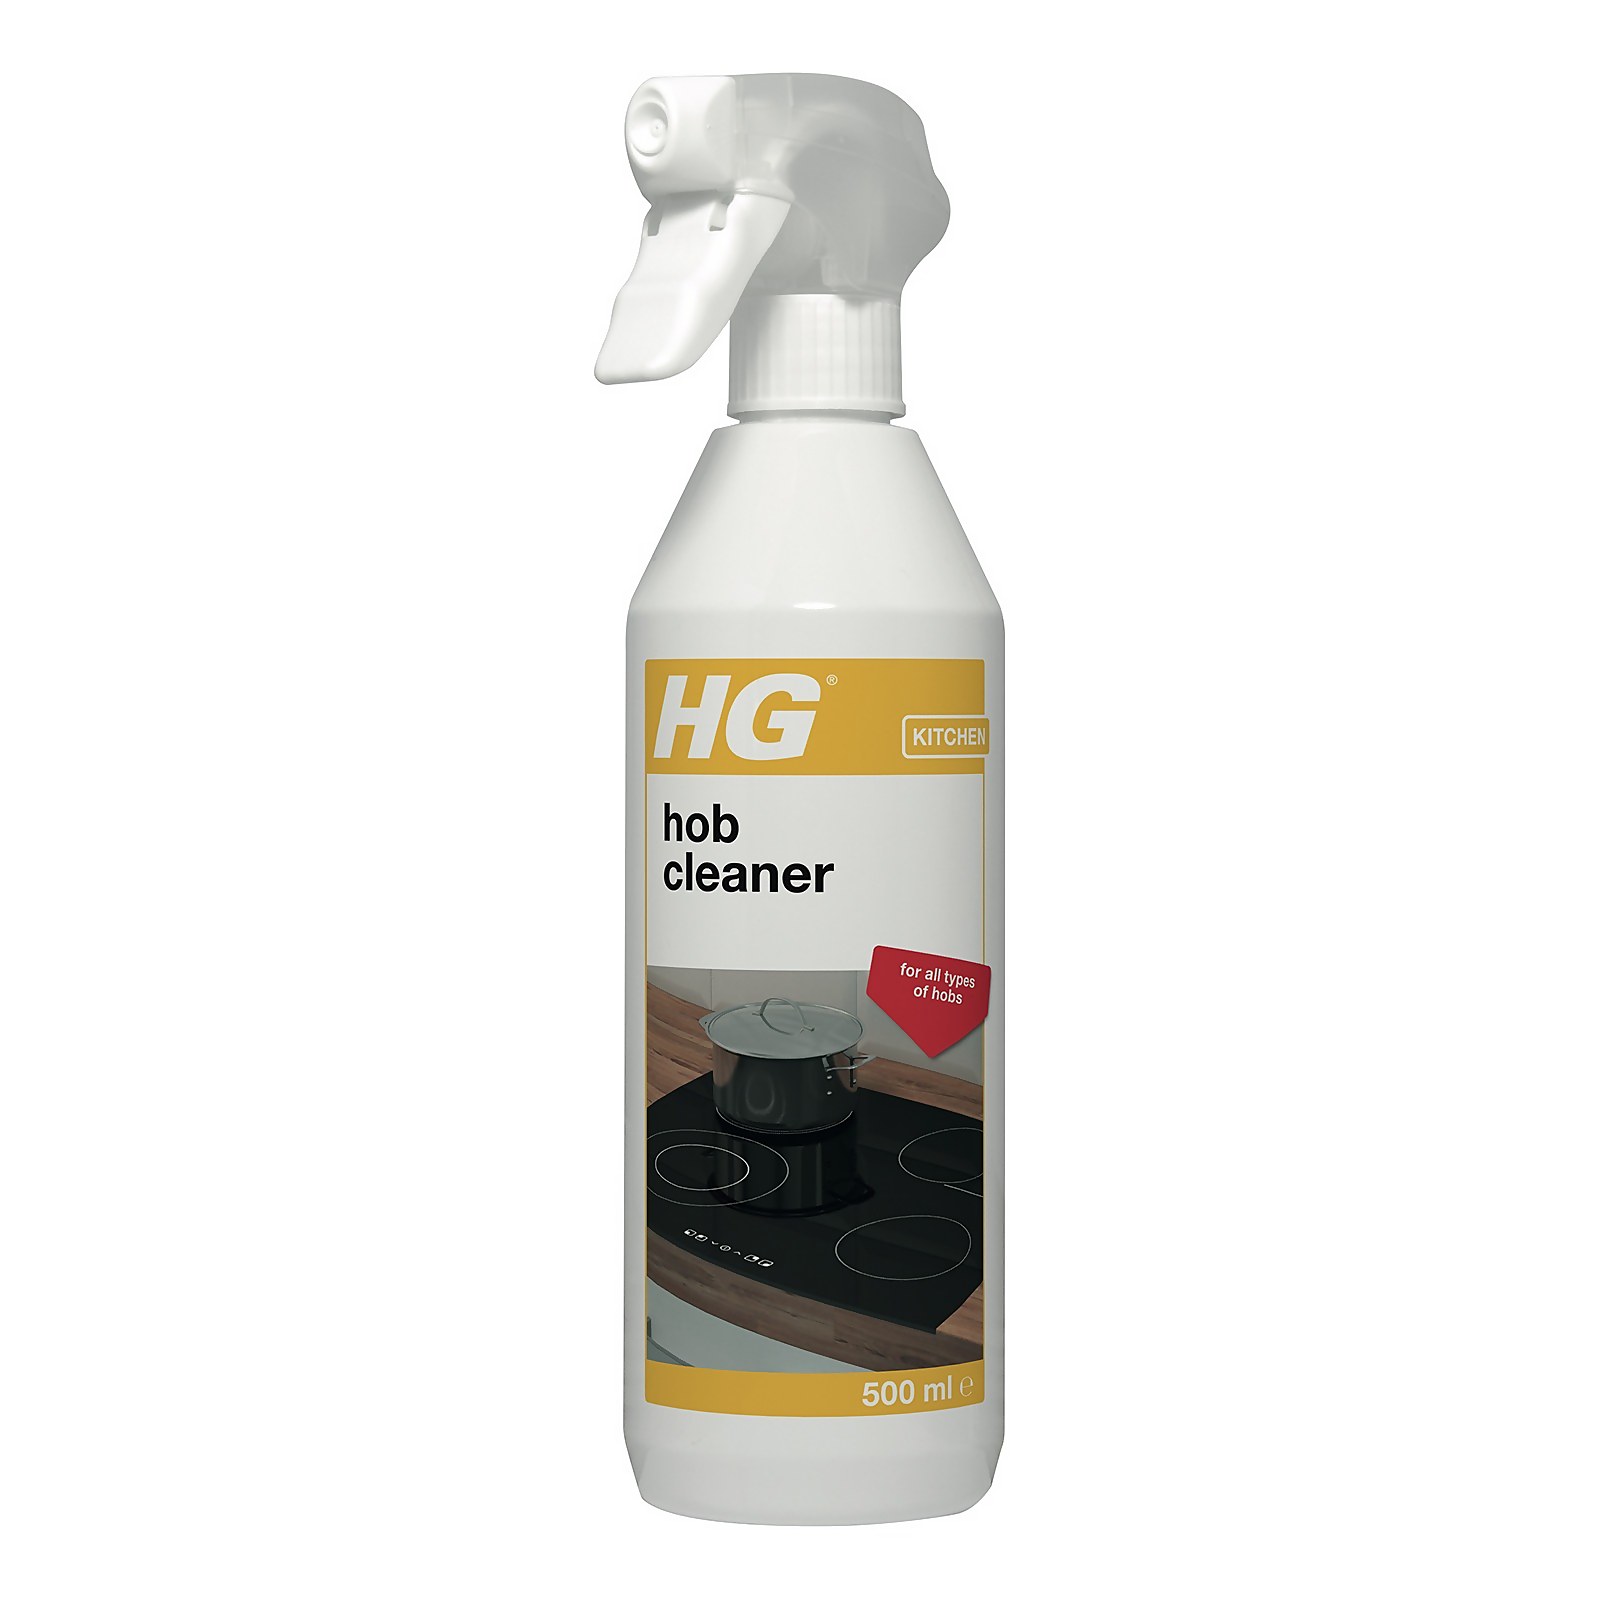 Photo of Hg Hob Cleaner For Everyday Use 500ml